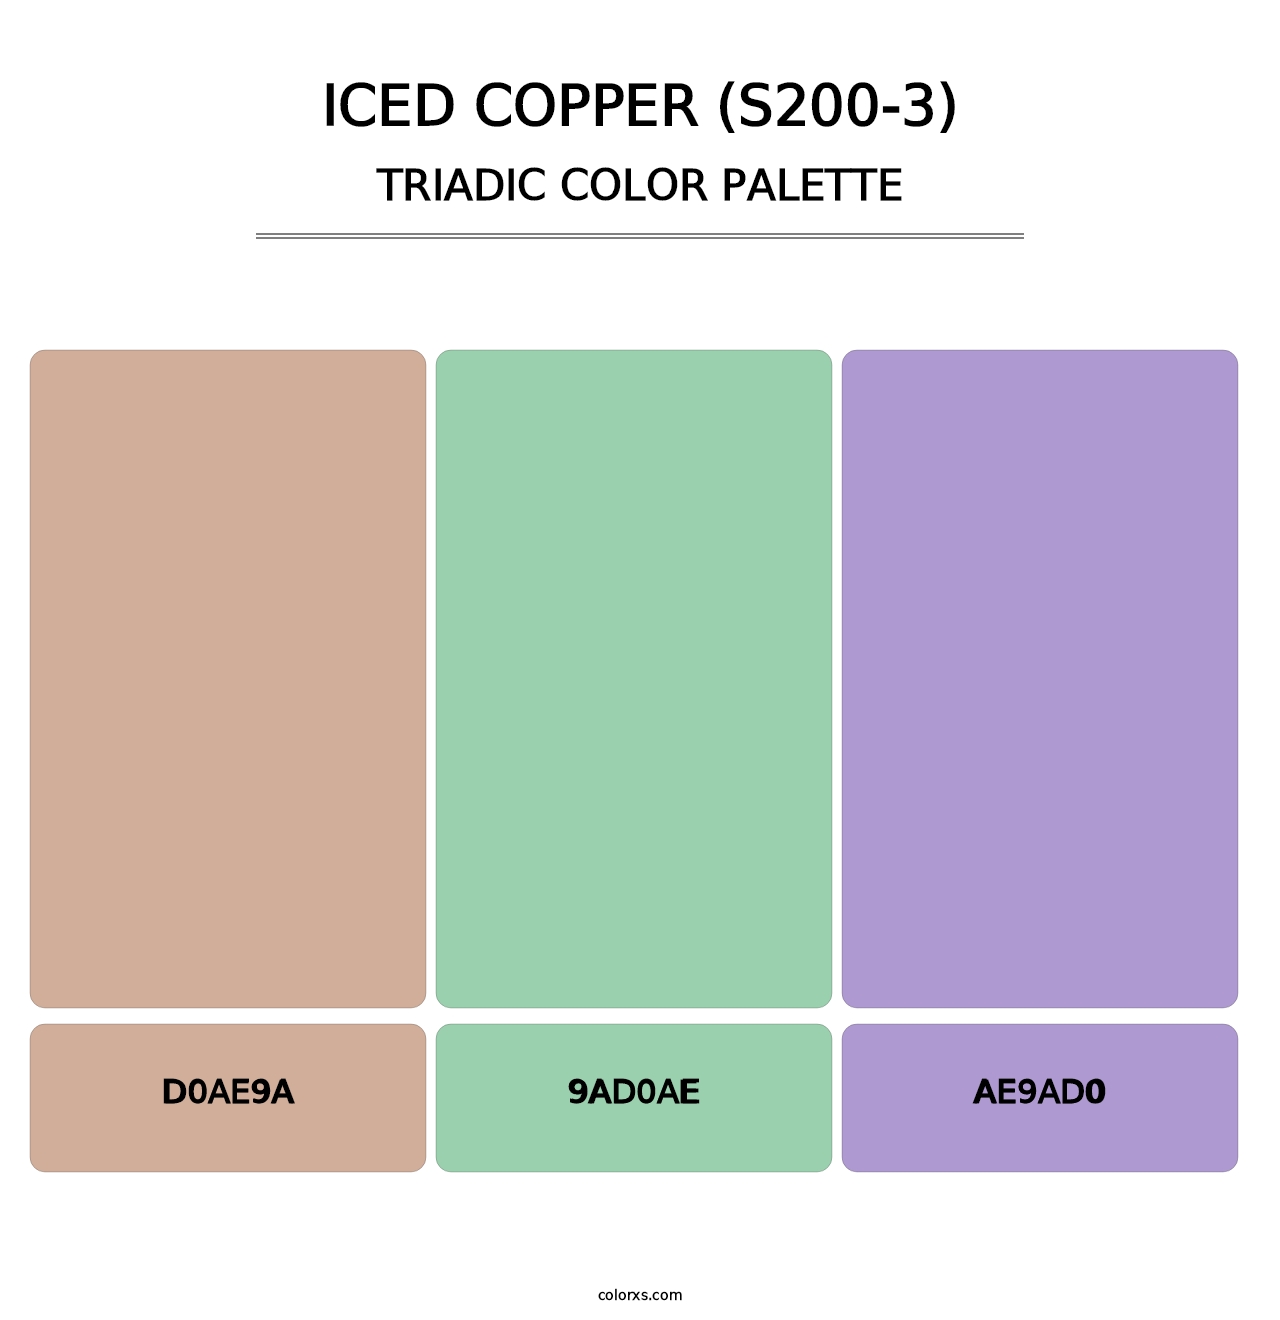 Iced Copper (S200-3) - Triadic Color Palette